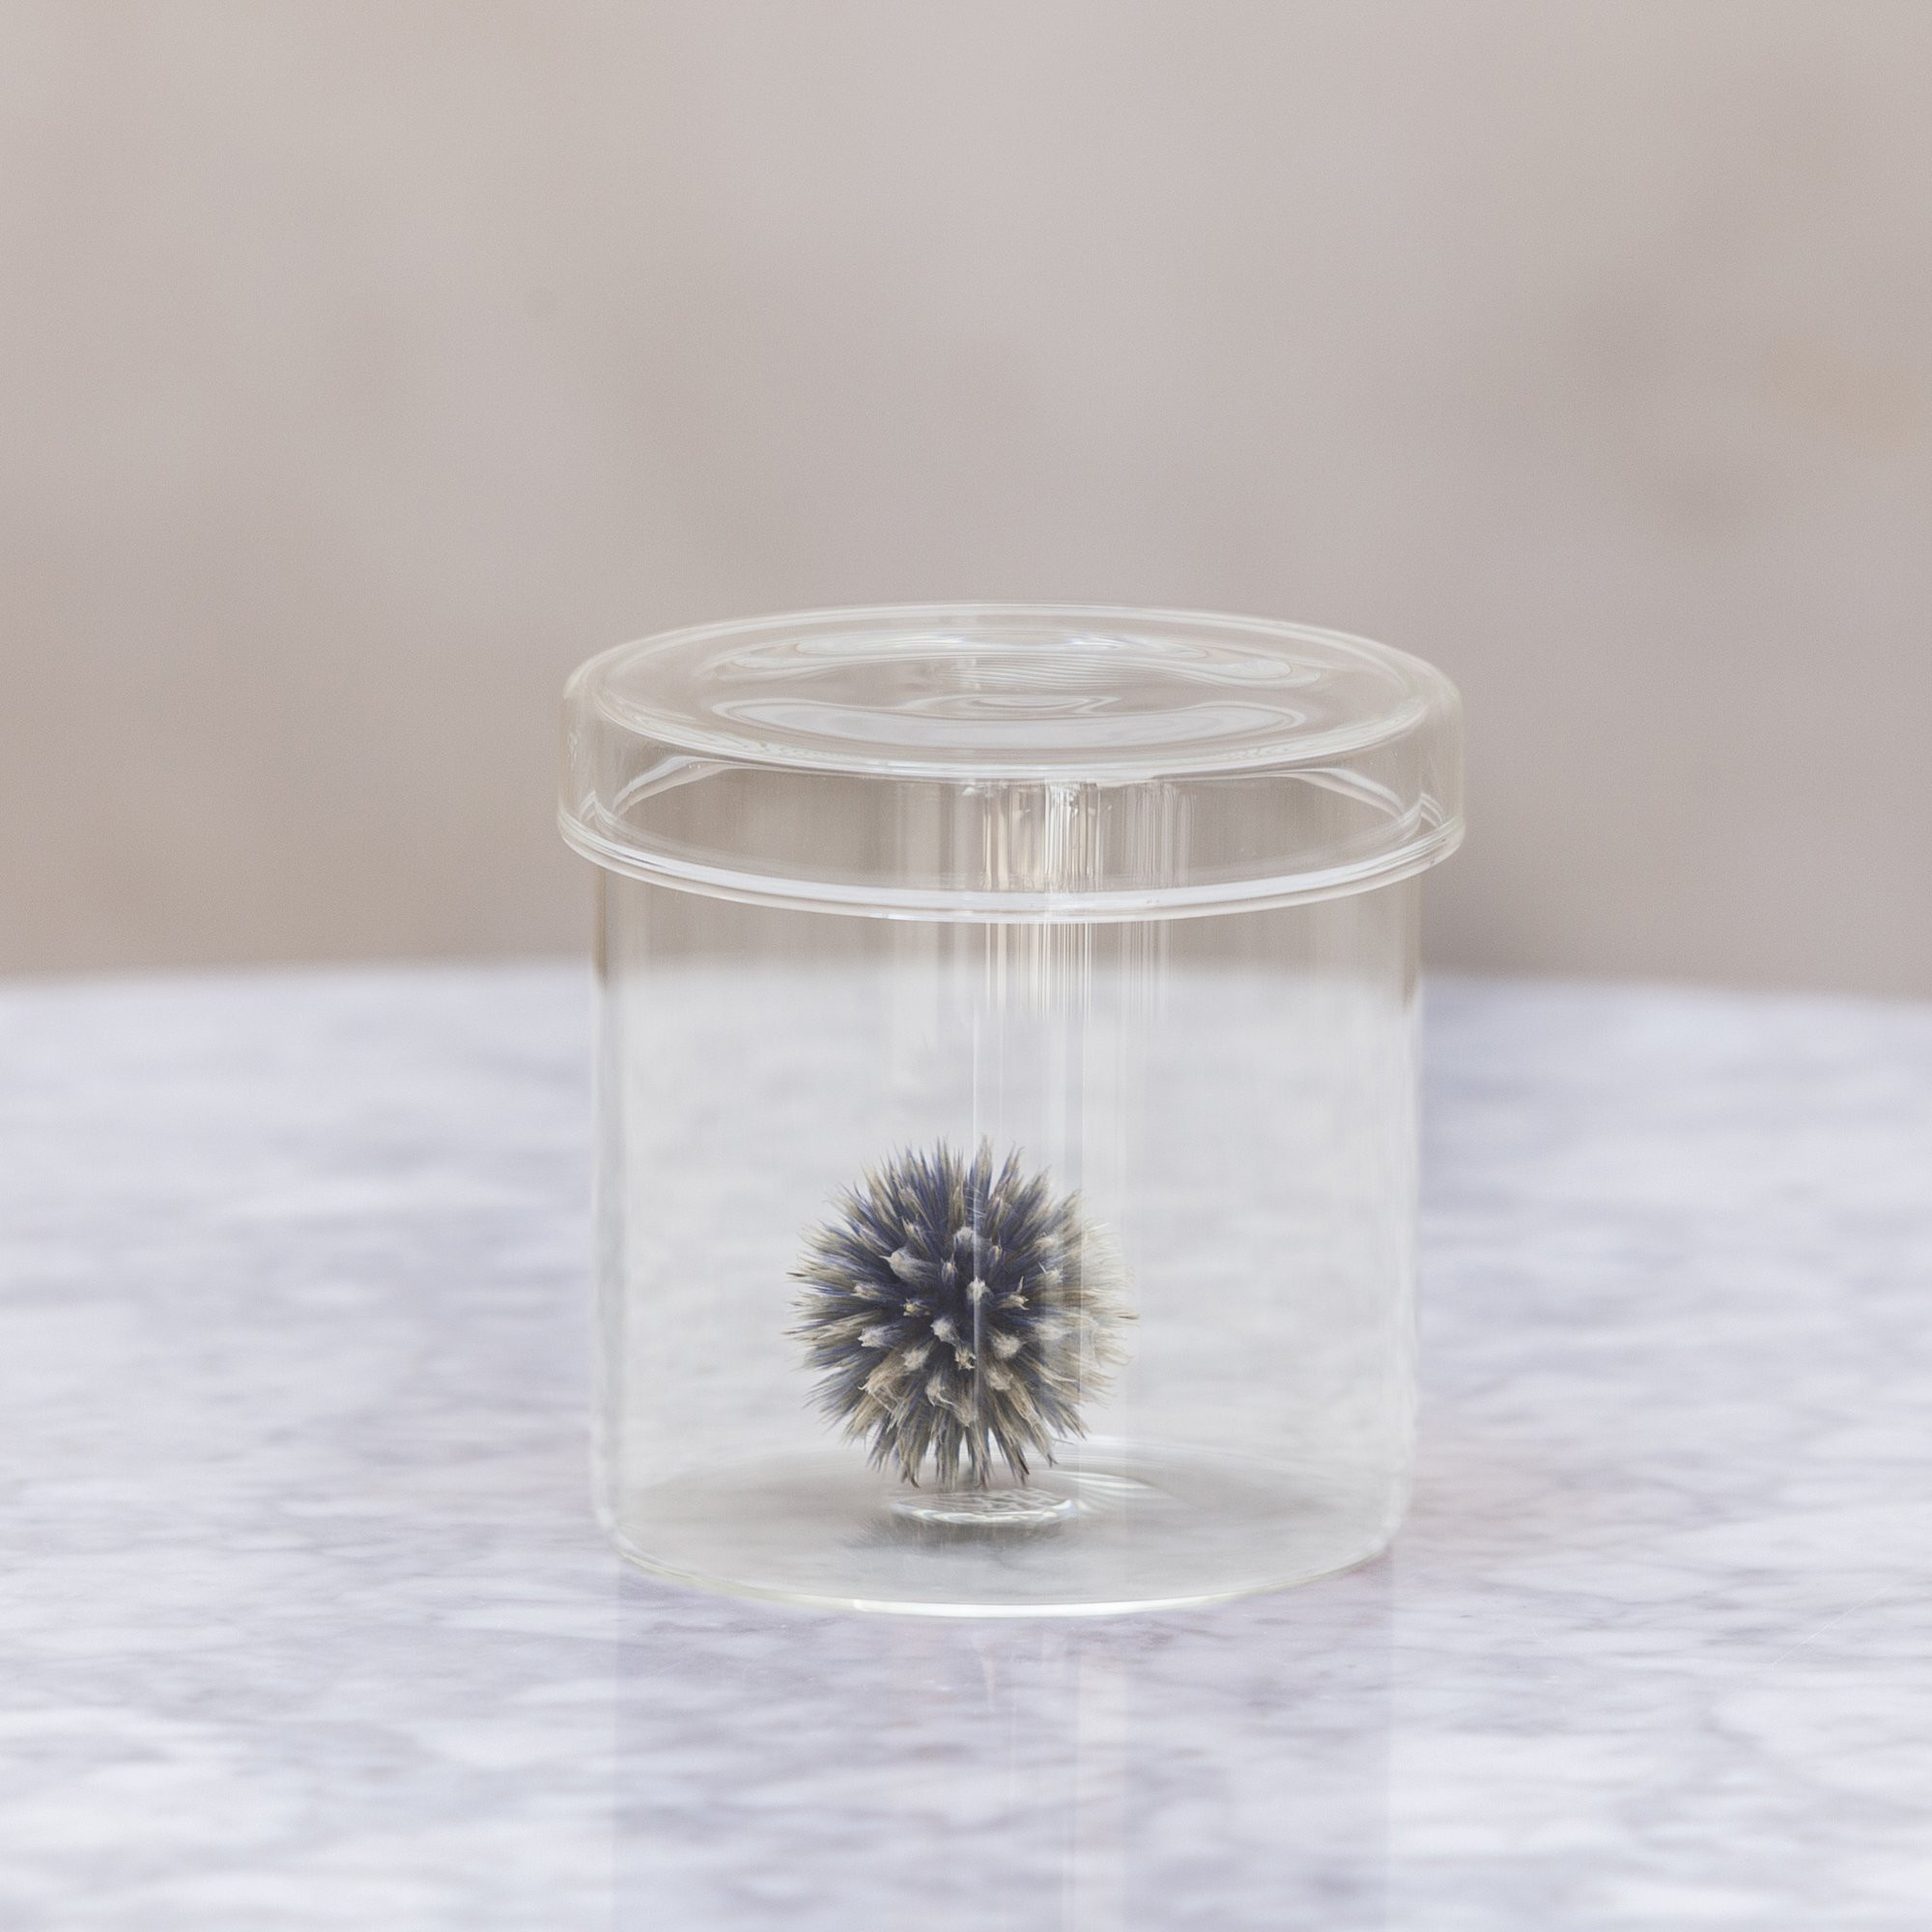 glass sea urchin vase of living hallesches haus for hay container large